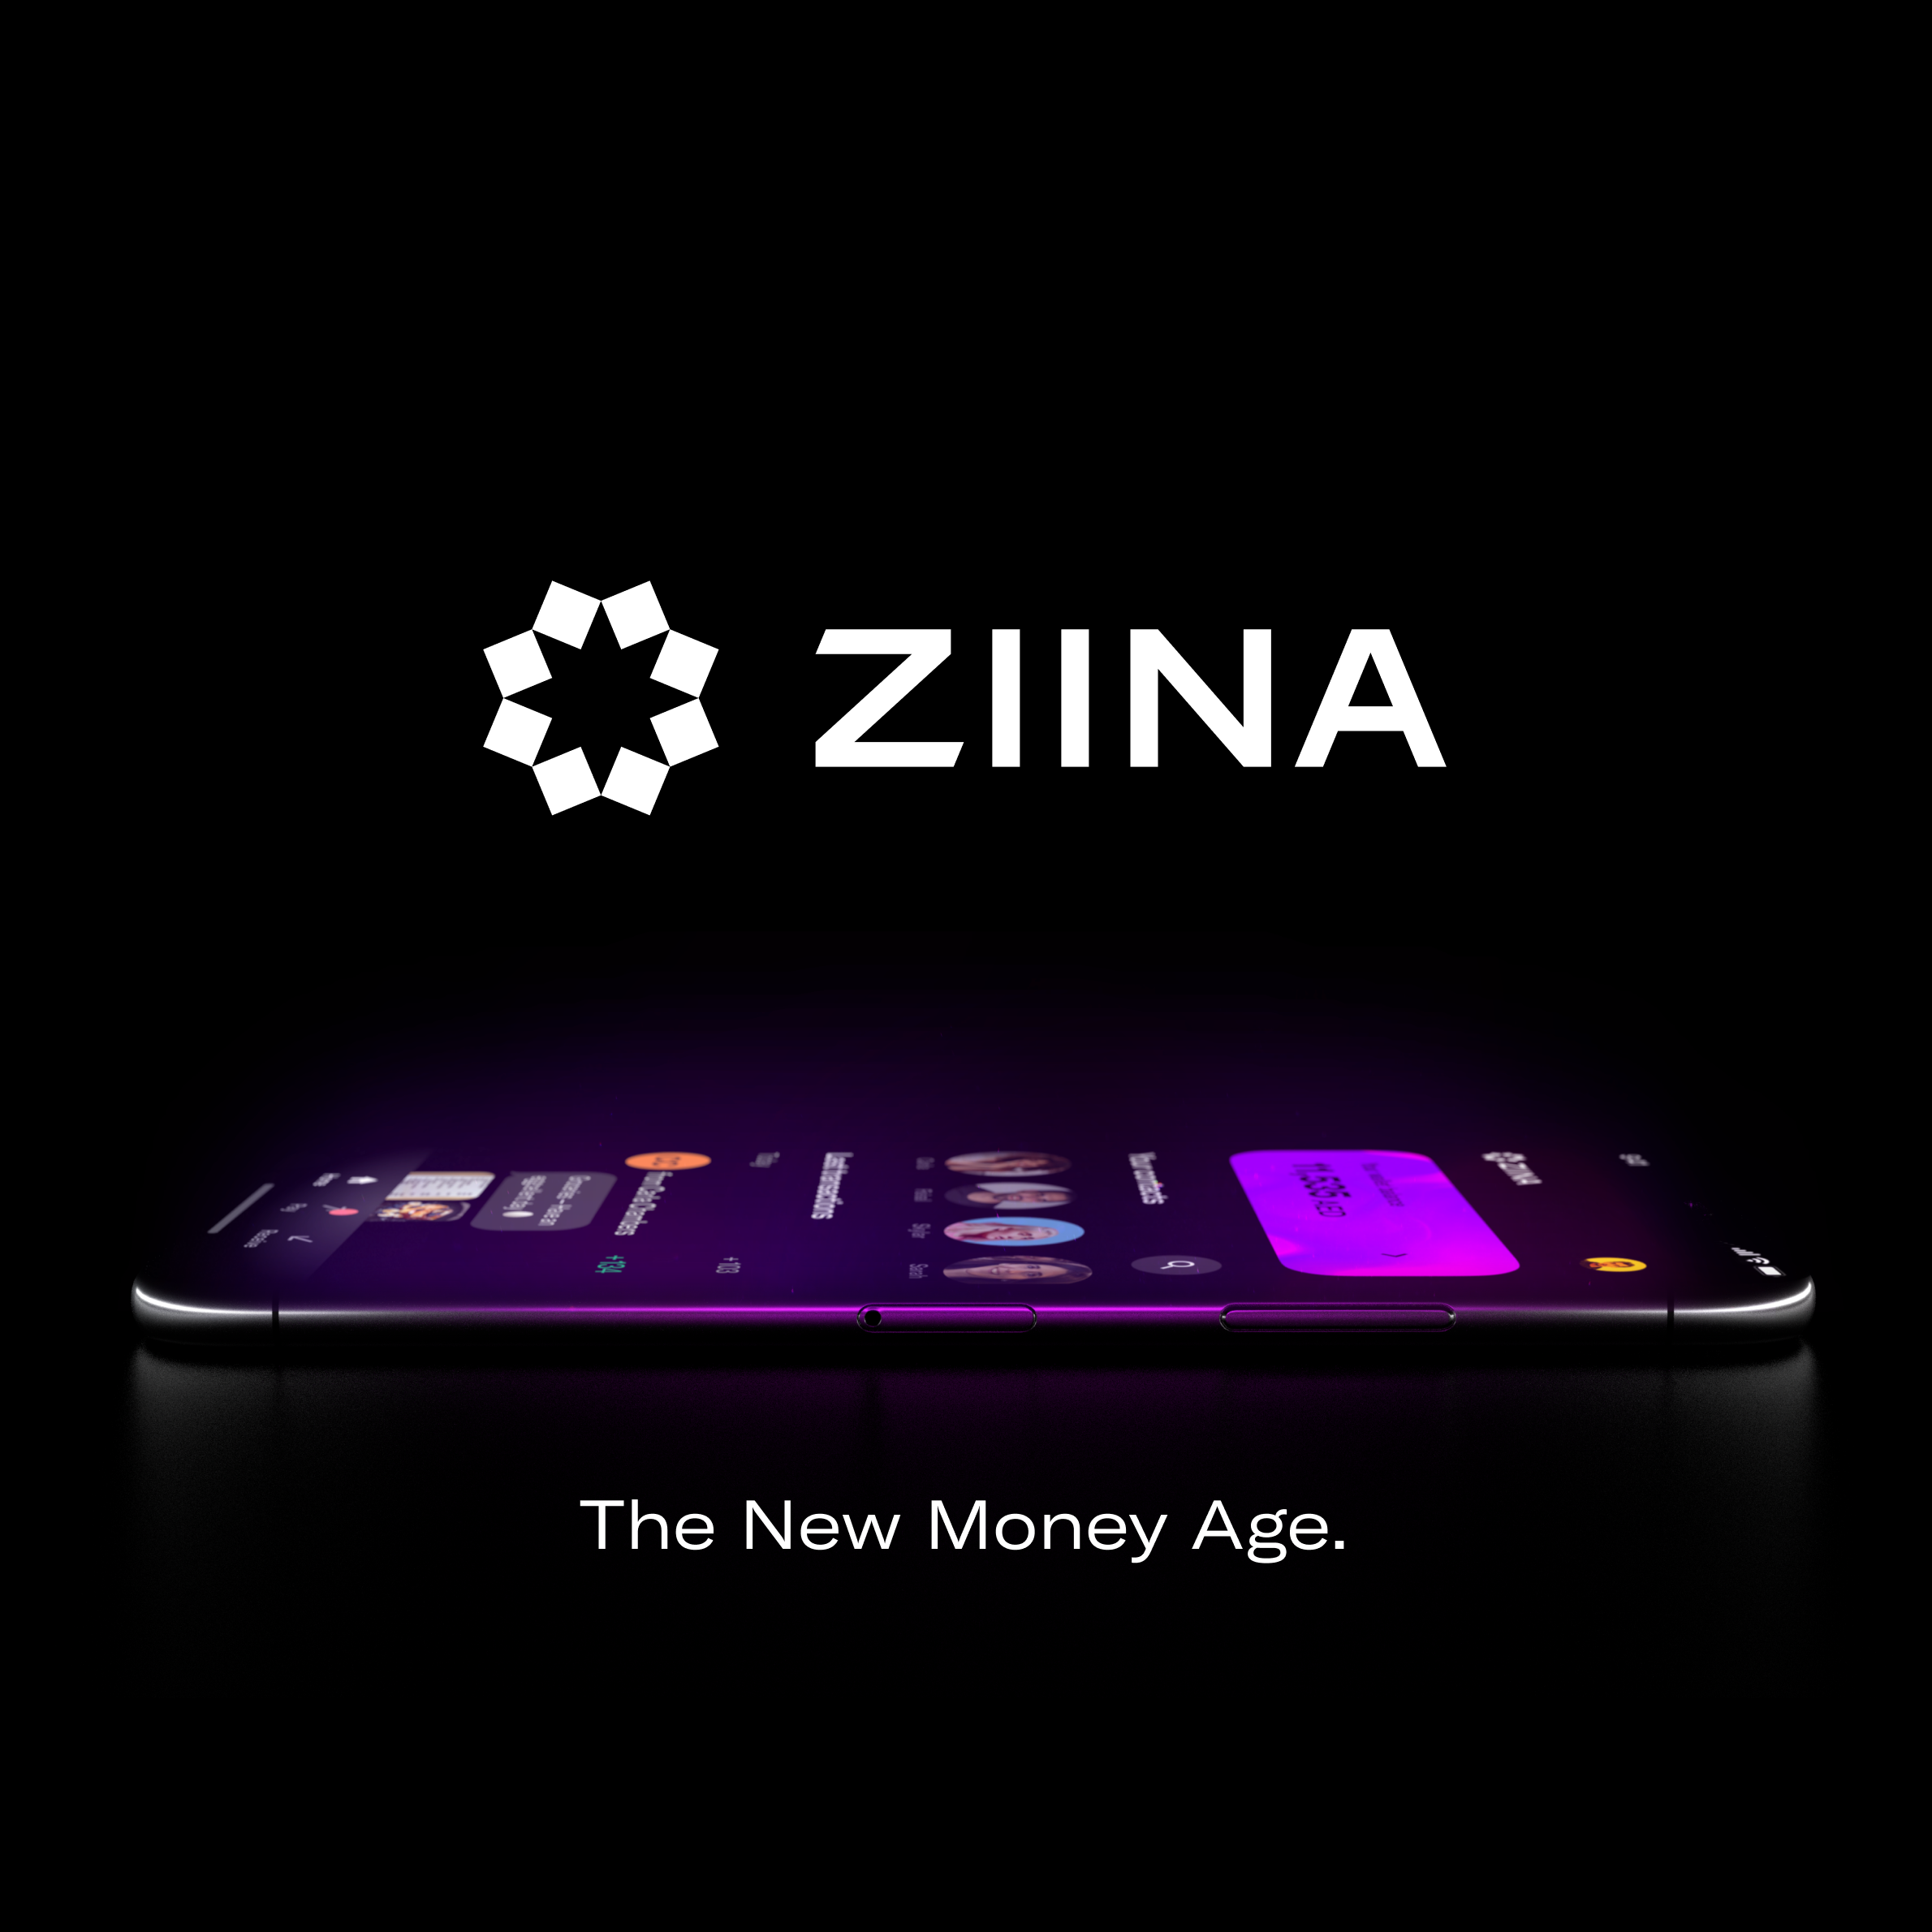 Ziina Announces New App Incentive Offering Users the Chance to Win AED 10,000